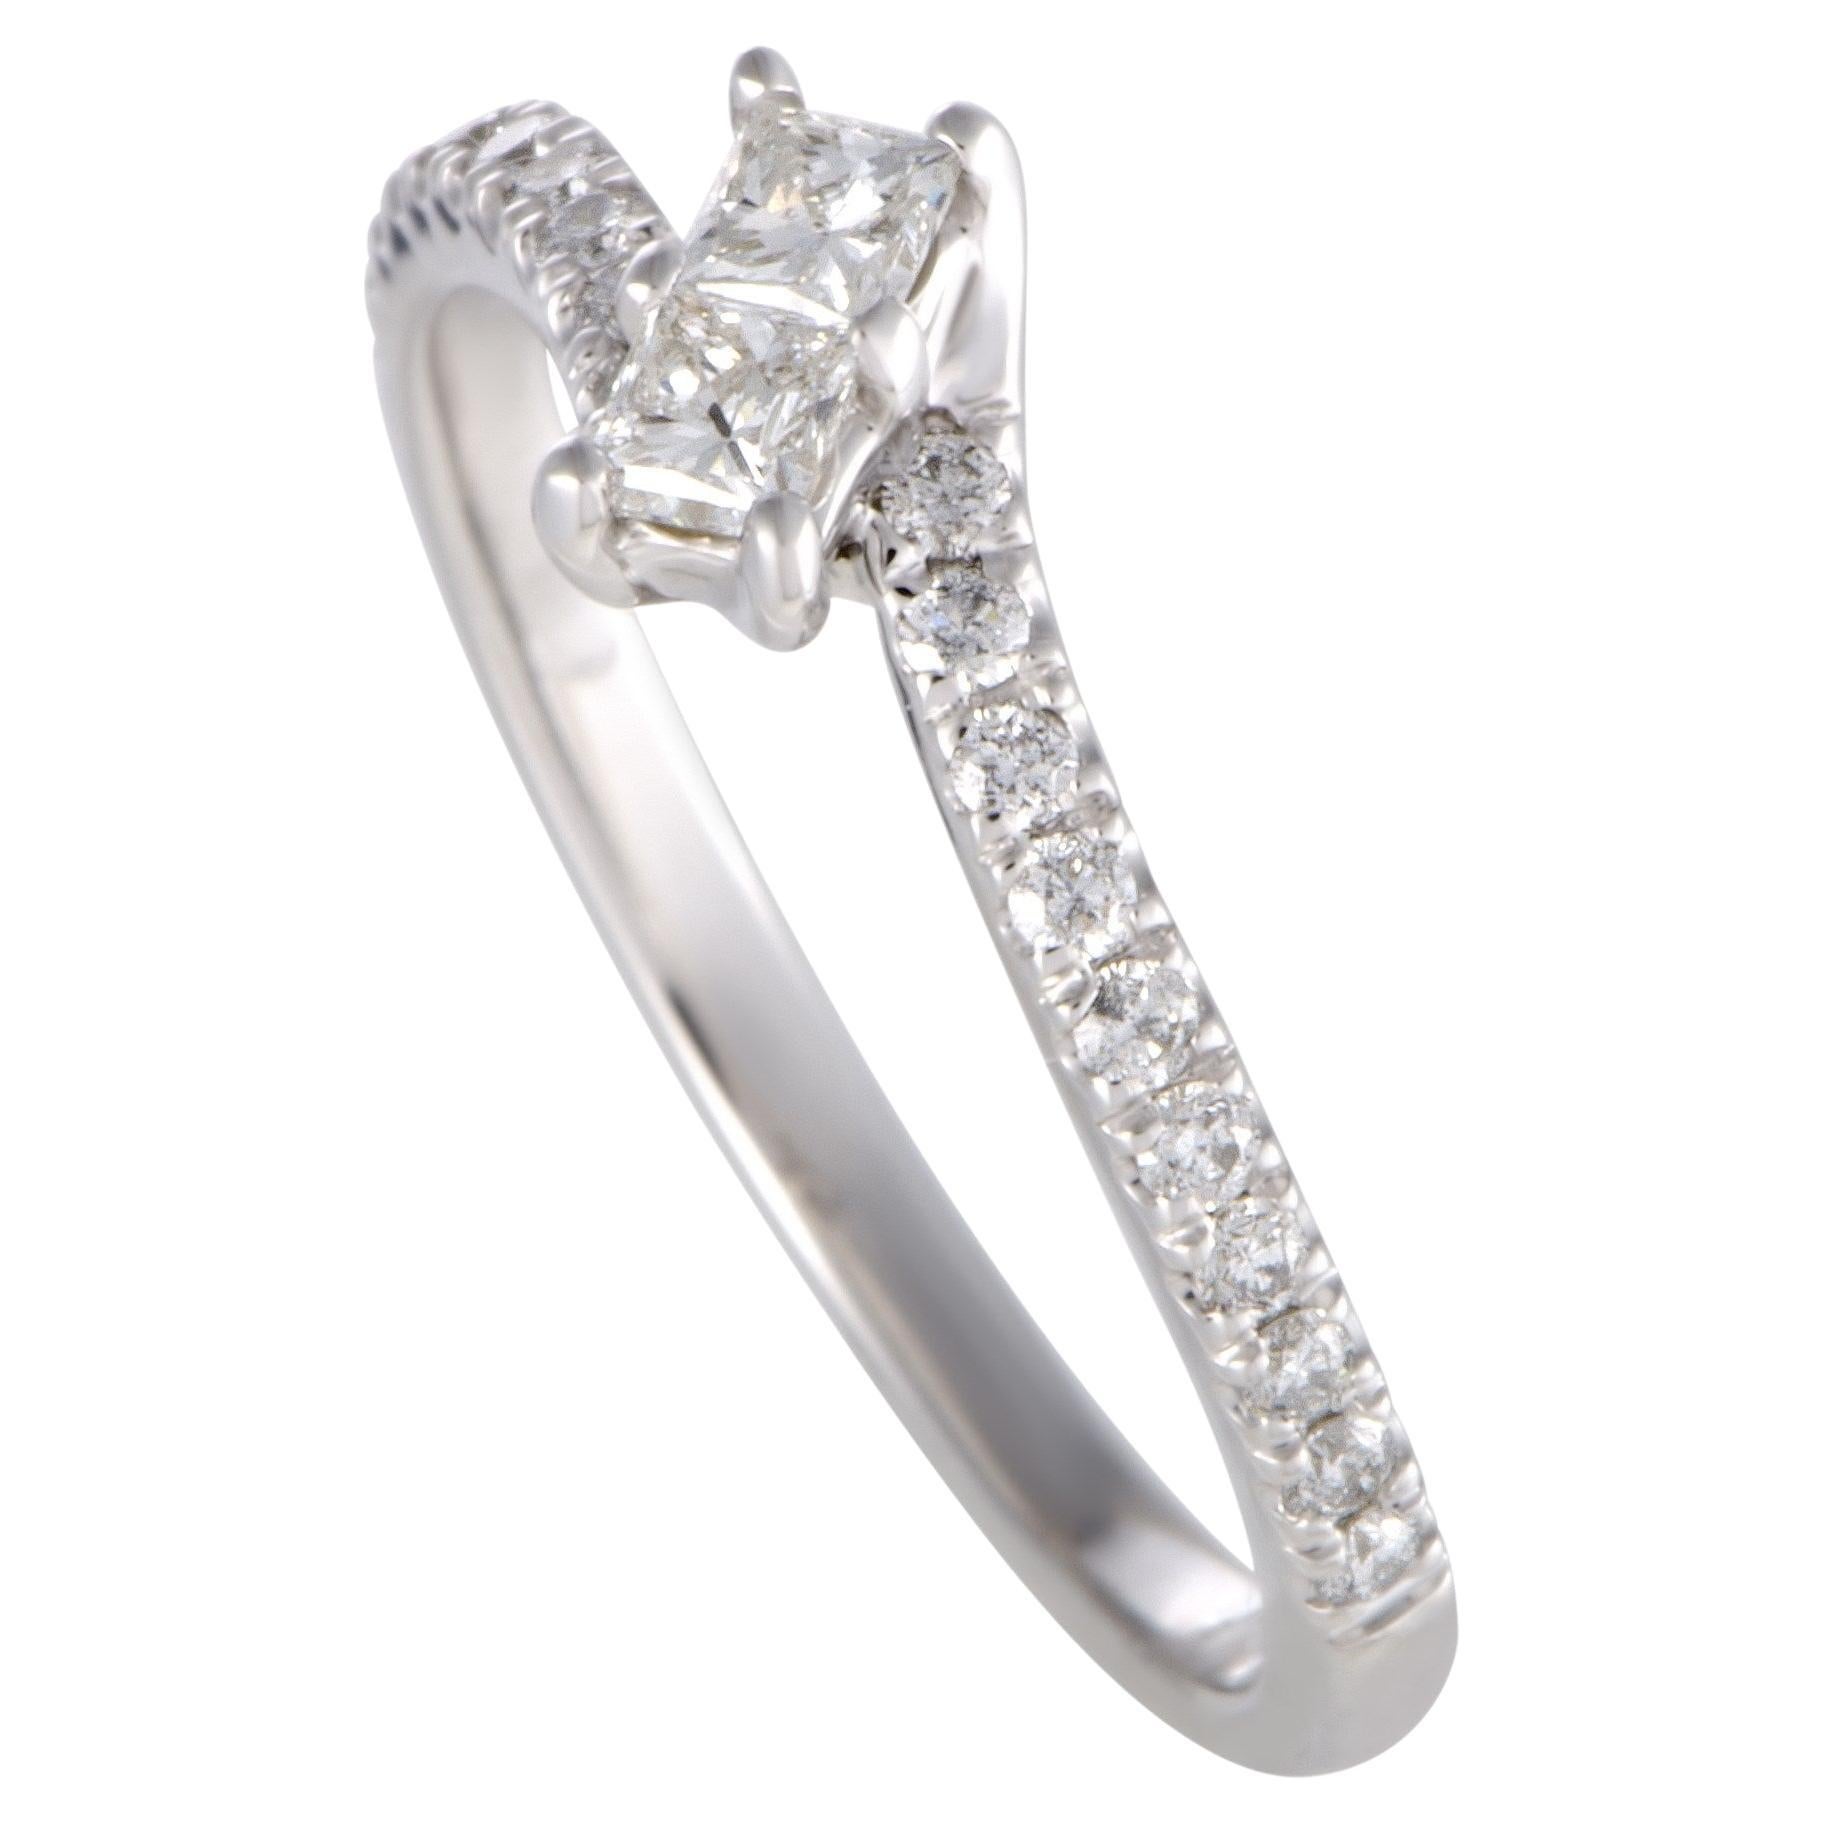 LB Exclusive 14K White Gold 0.50 Ct Diamond Curved Engagement Ring